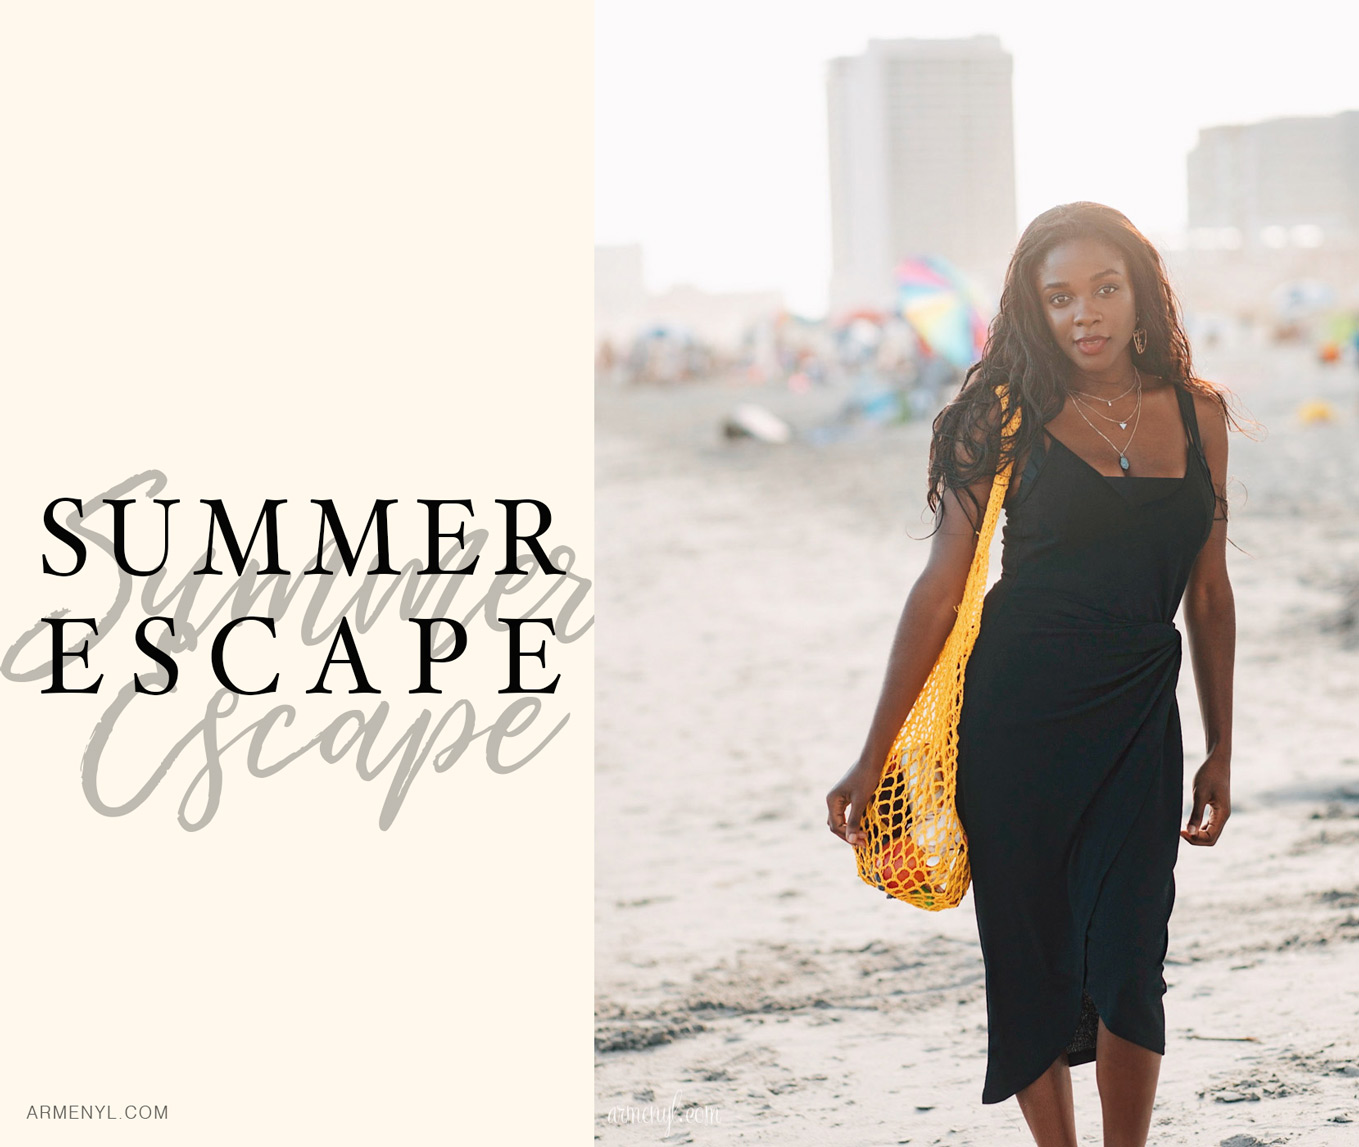 A summer escape in the winter by travel fashion blogger Armenyl